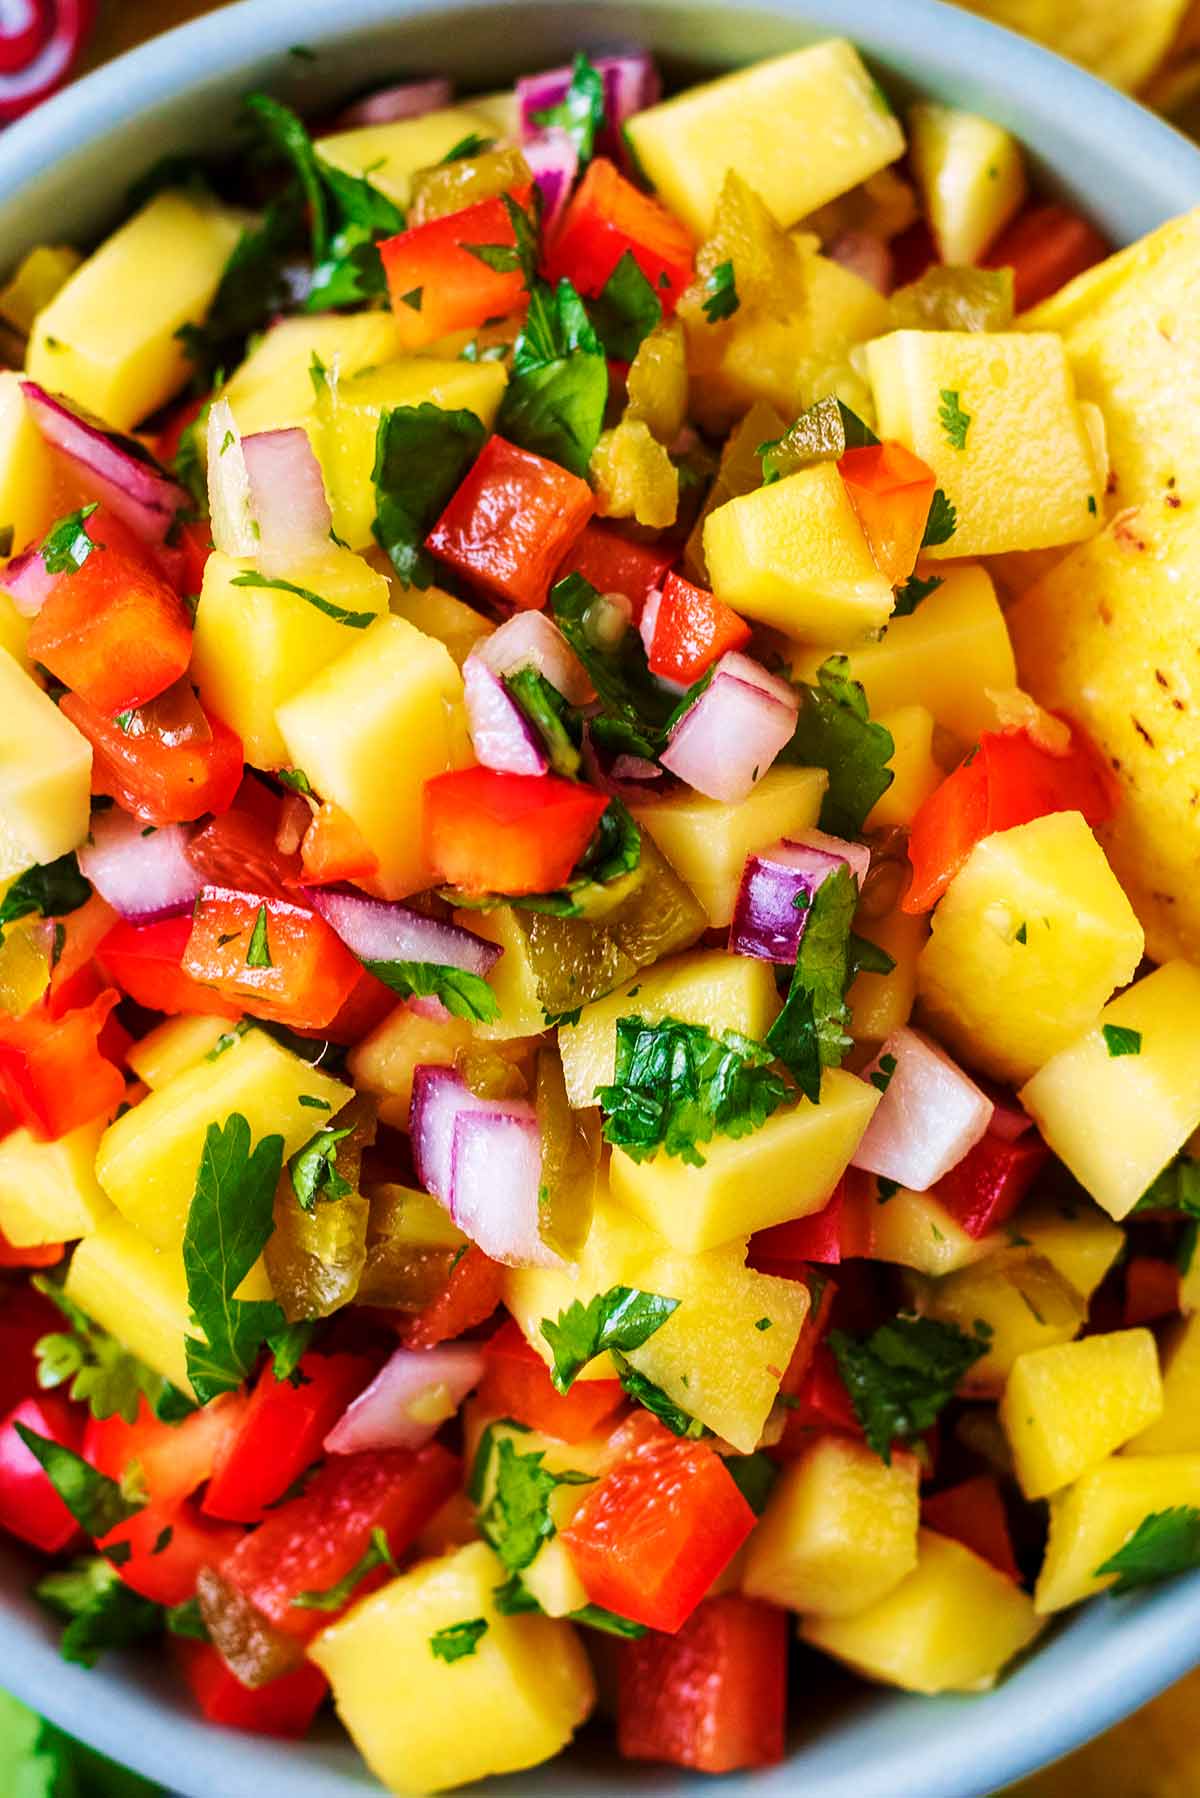 Chopped mango, tomatoes and onion mixed with coriander leaves.